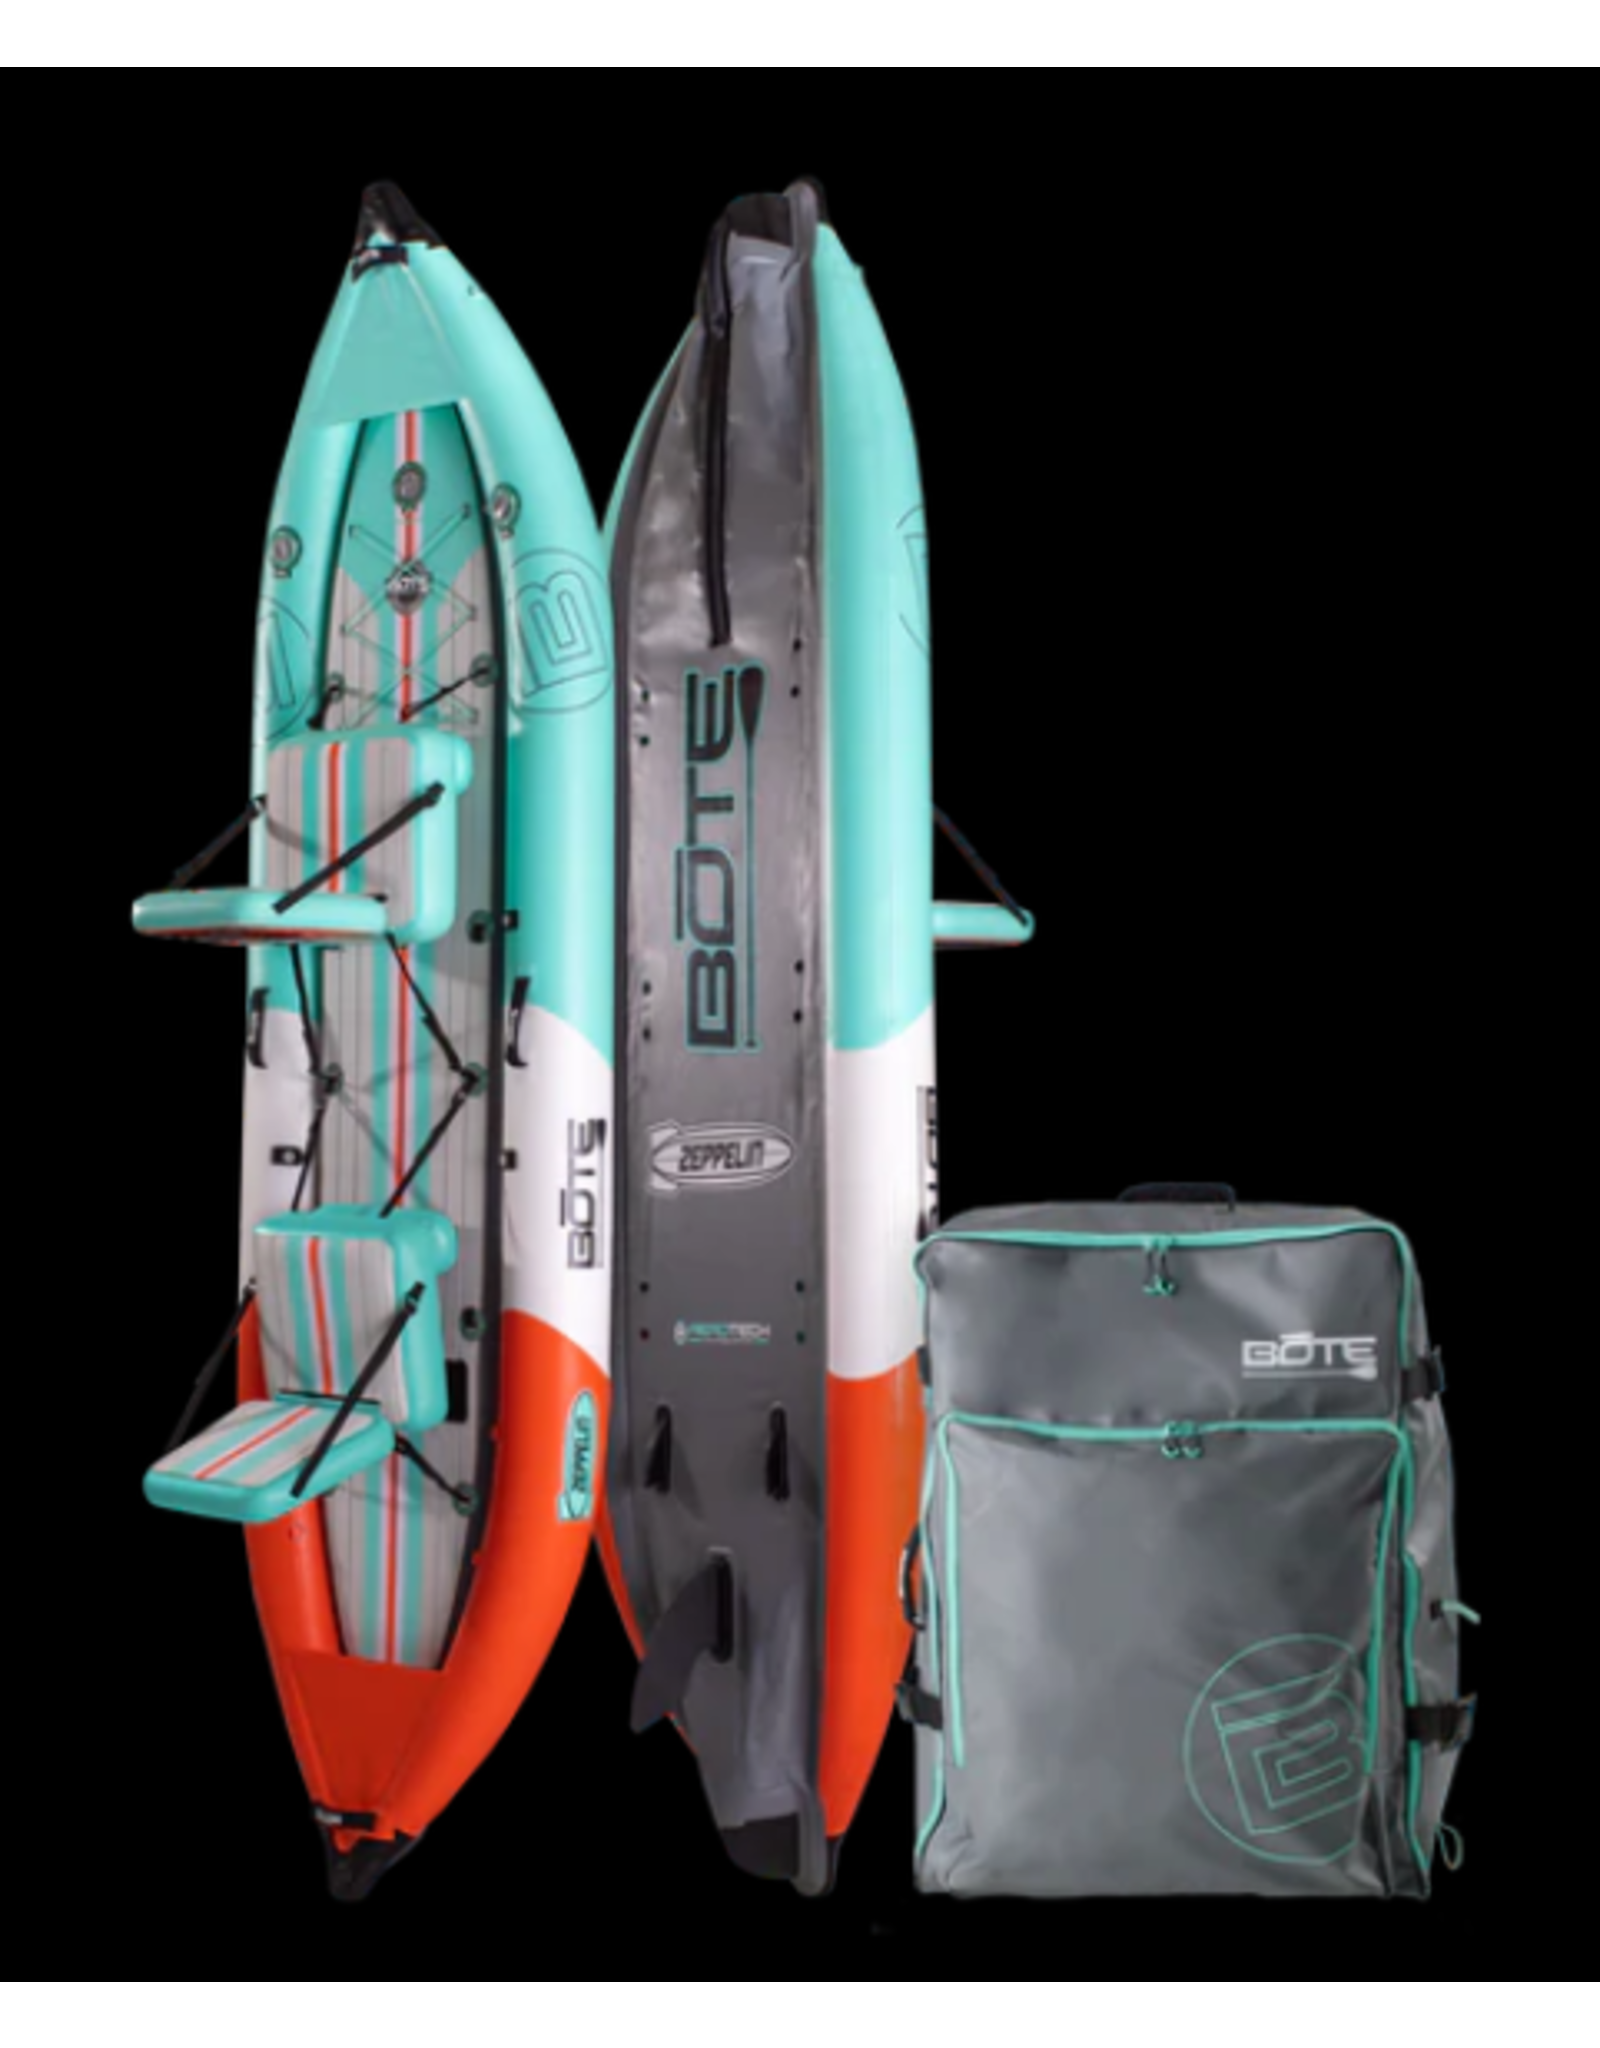 Bote KAYAK GONFLABLE ZEPPELIN 12'6 AÉRO Classic Seafoam Bote